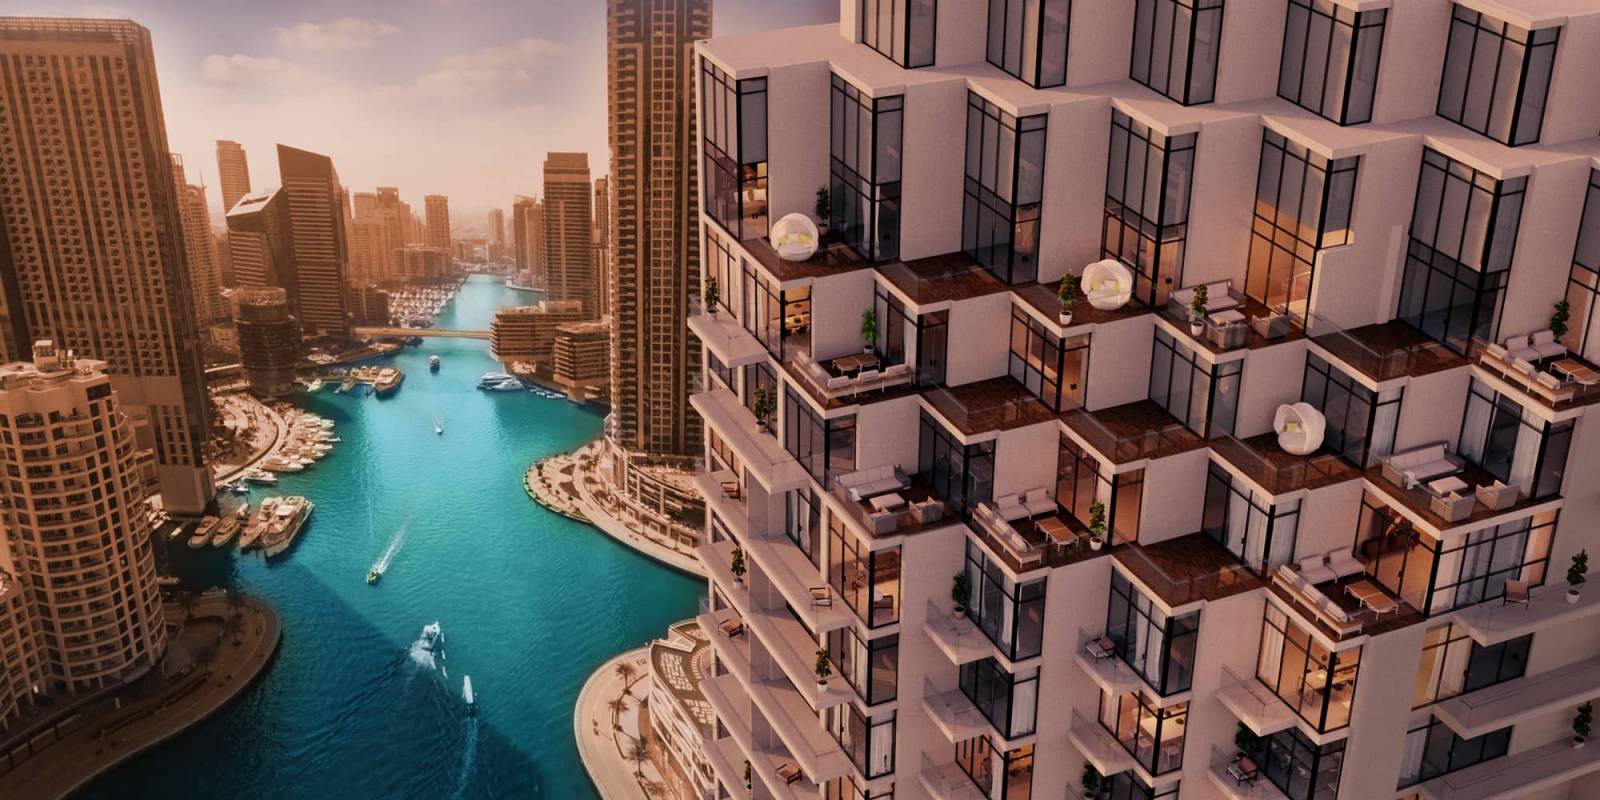 New build homes and developments for sale in Dubai